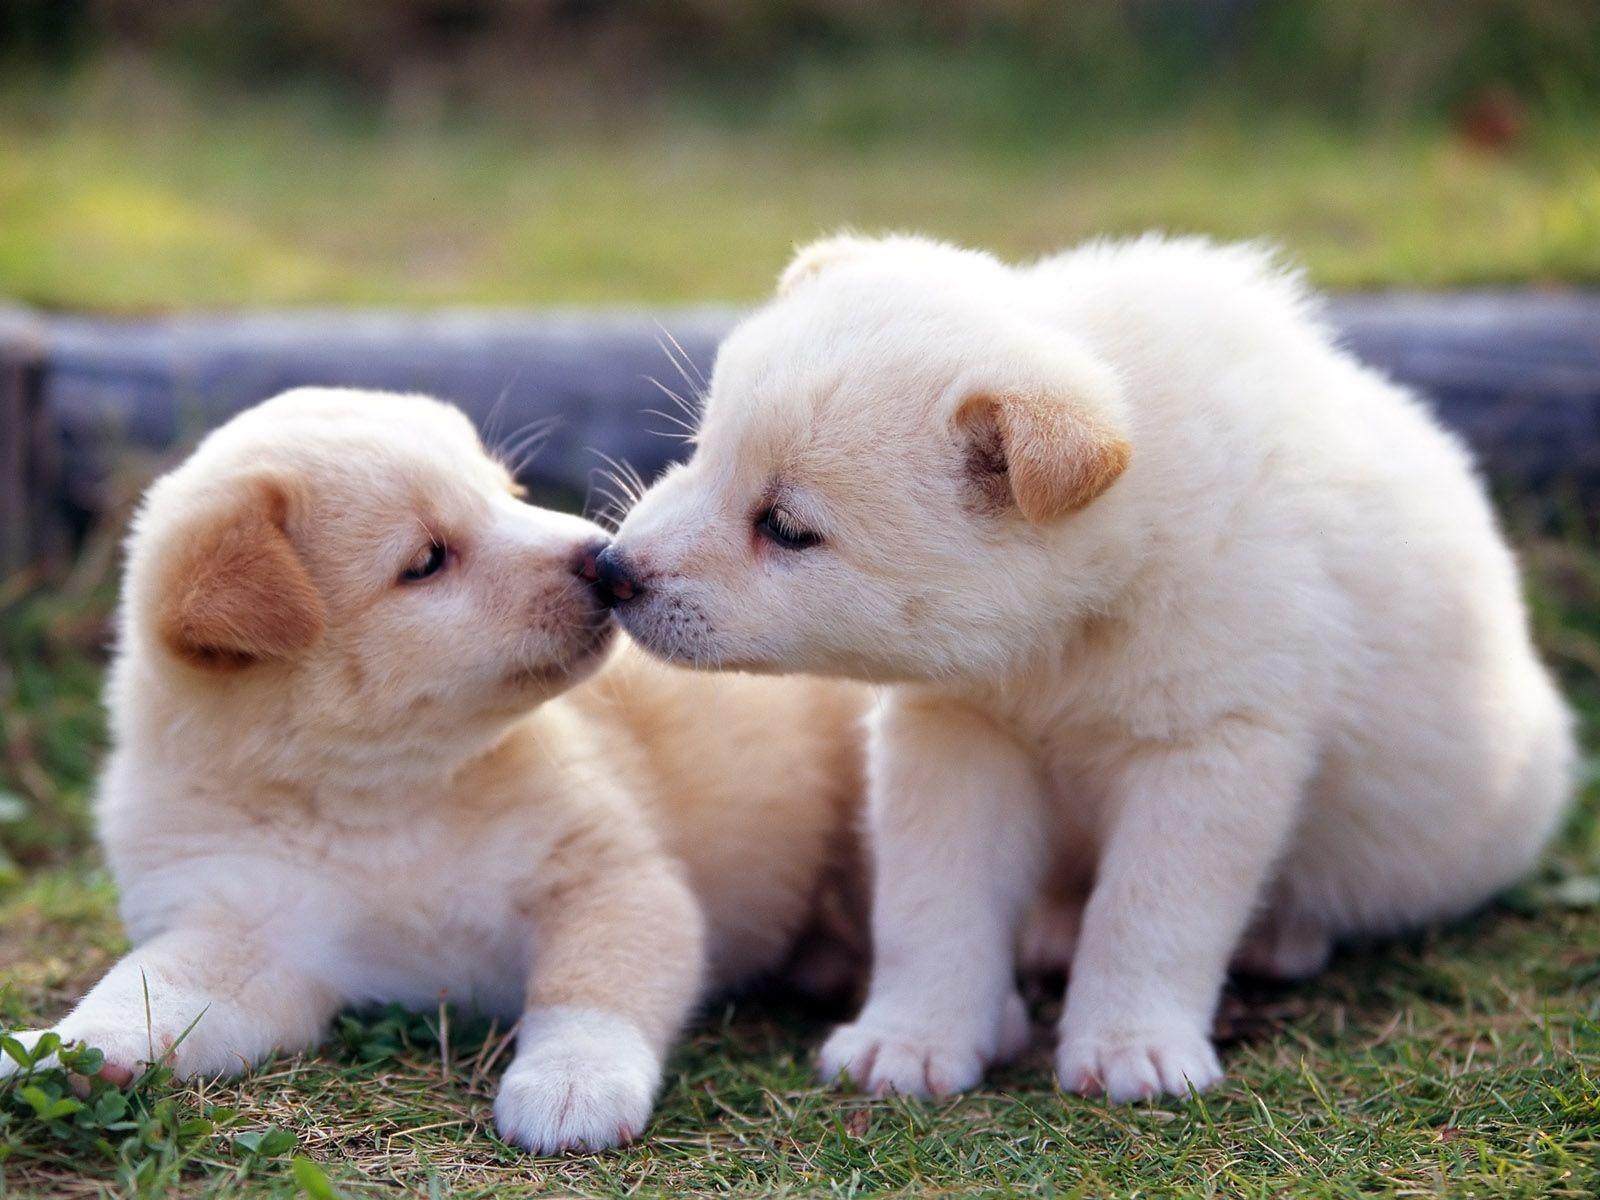 Preview Cute Pictures Of Dogs - Cute Baby Animals , HD Wallpaper & Backgrounds